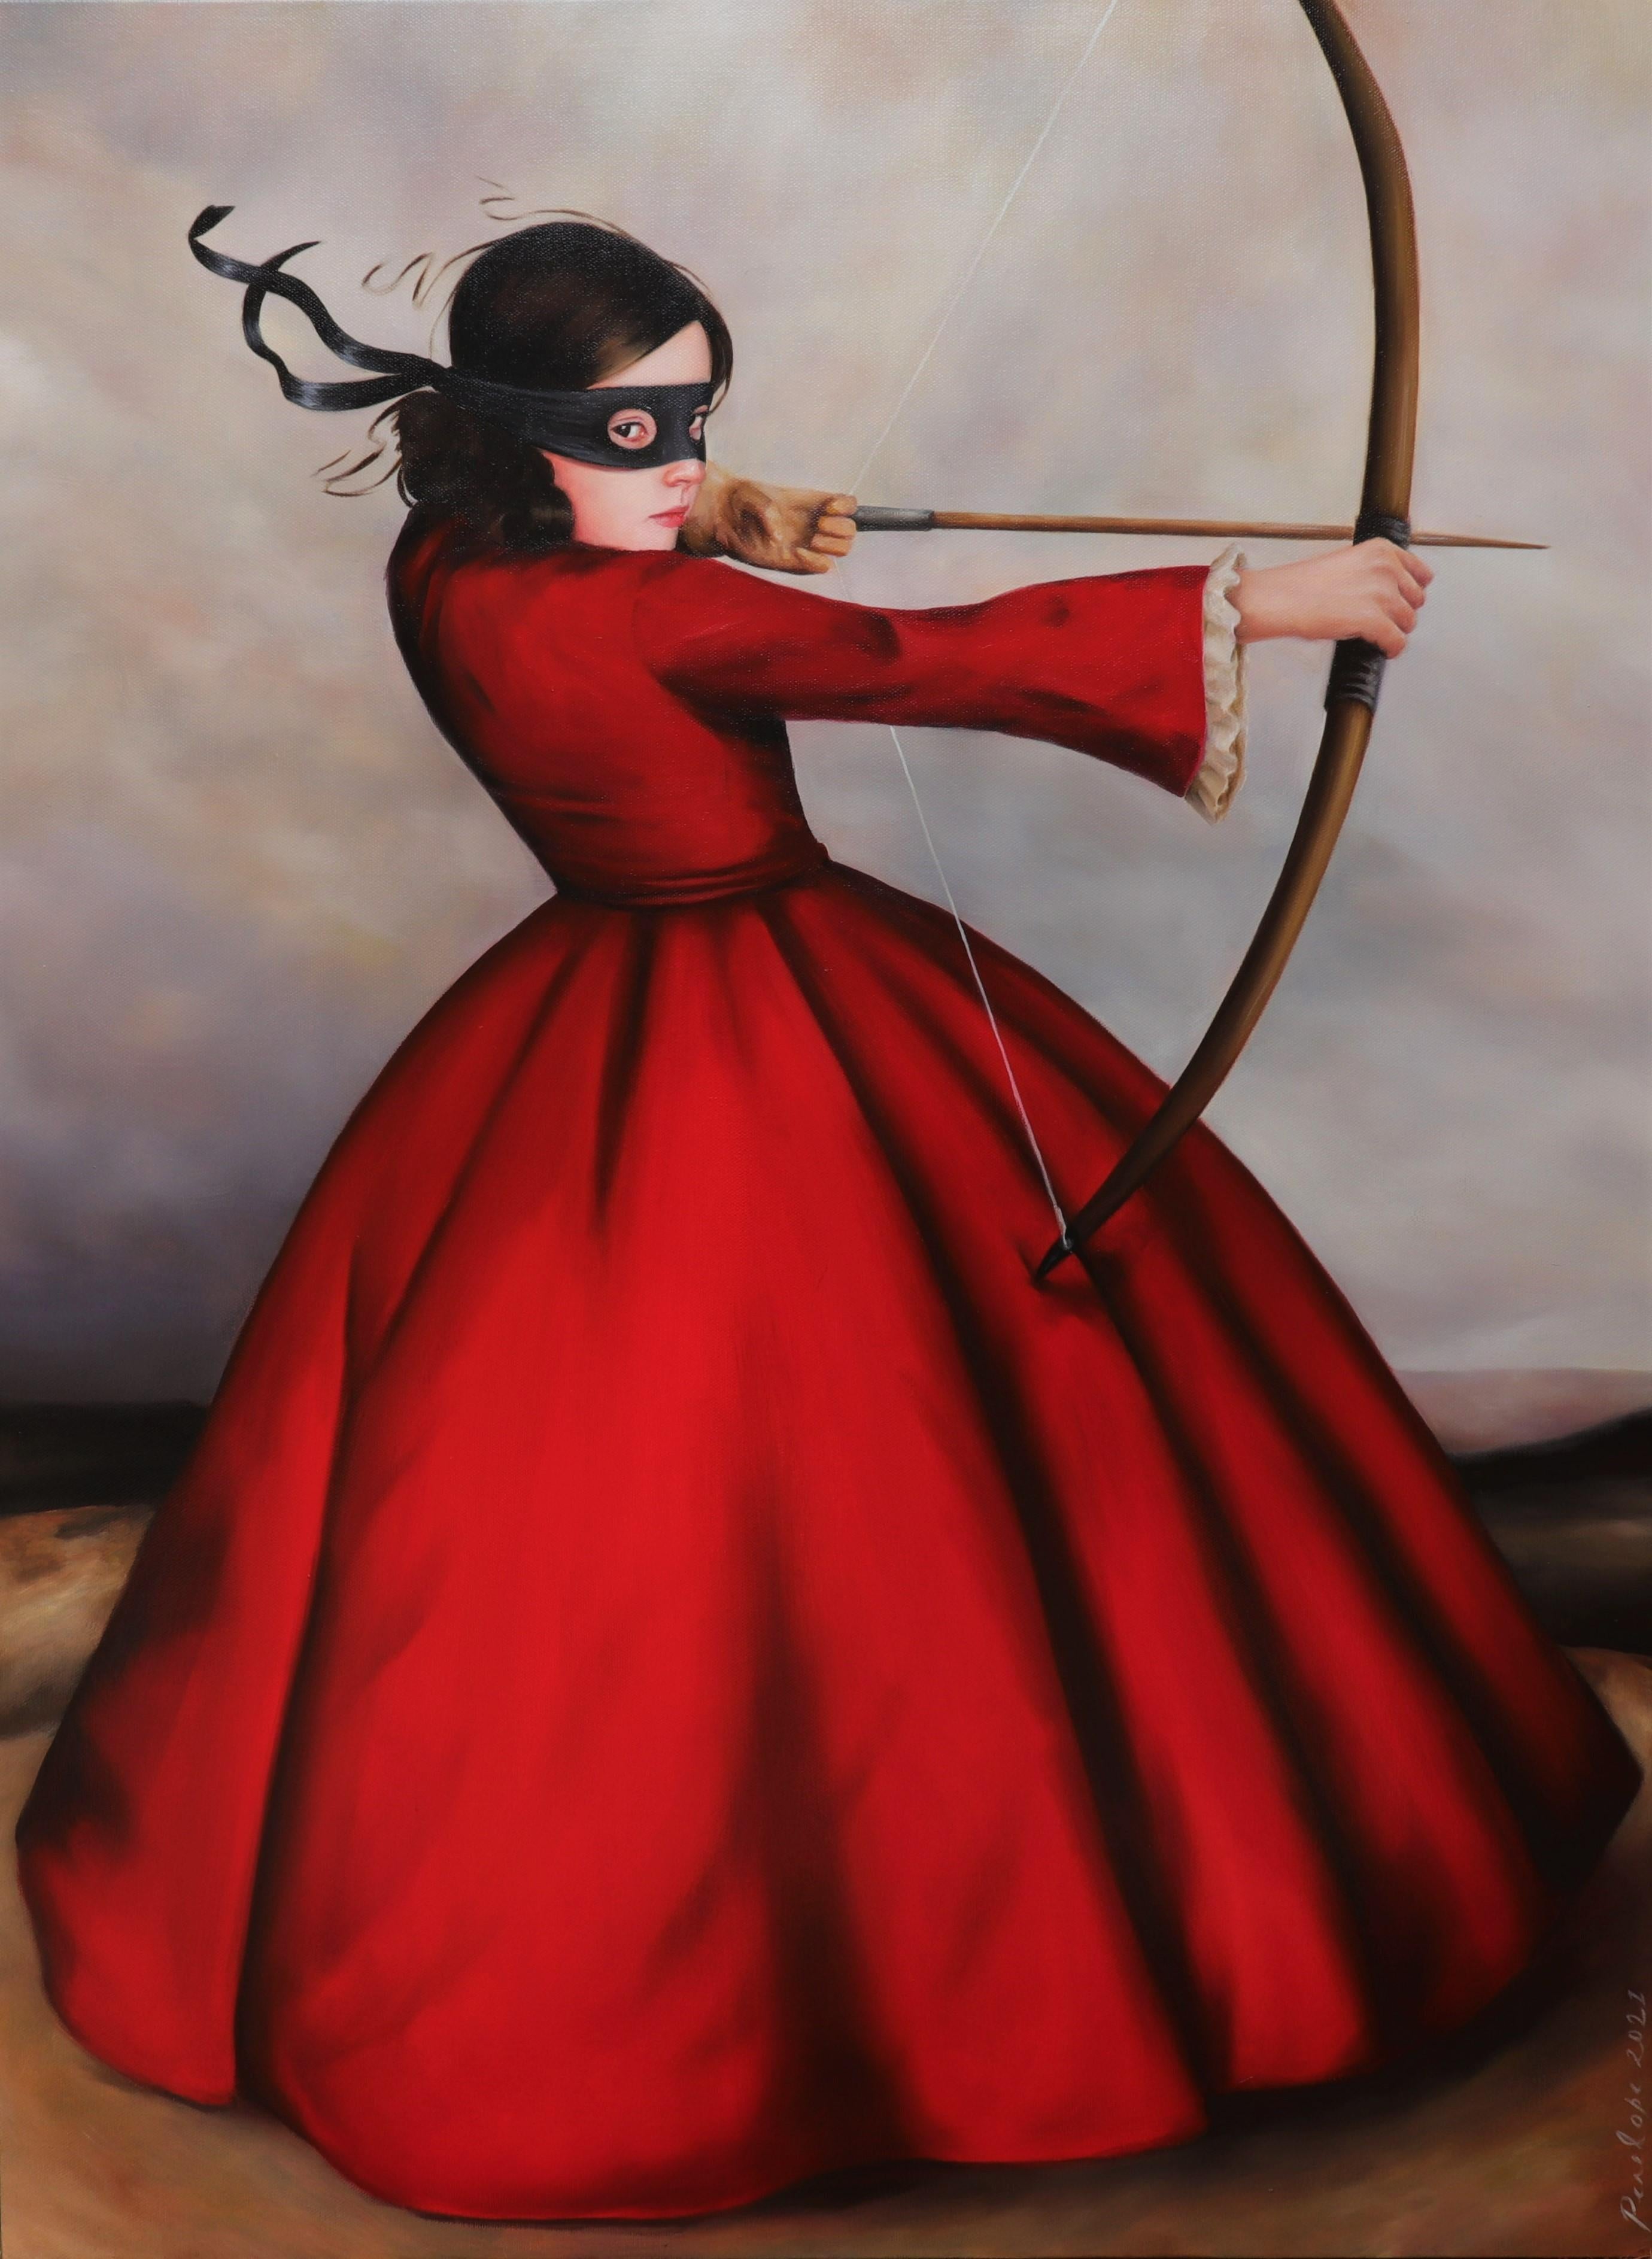 How To Get Started In Hunting - Masked Girl Old World Red Dress and Bow & Arrow